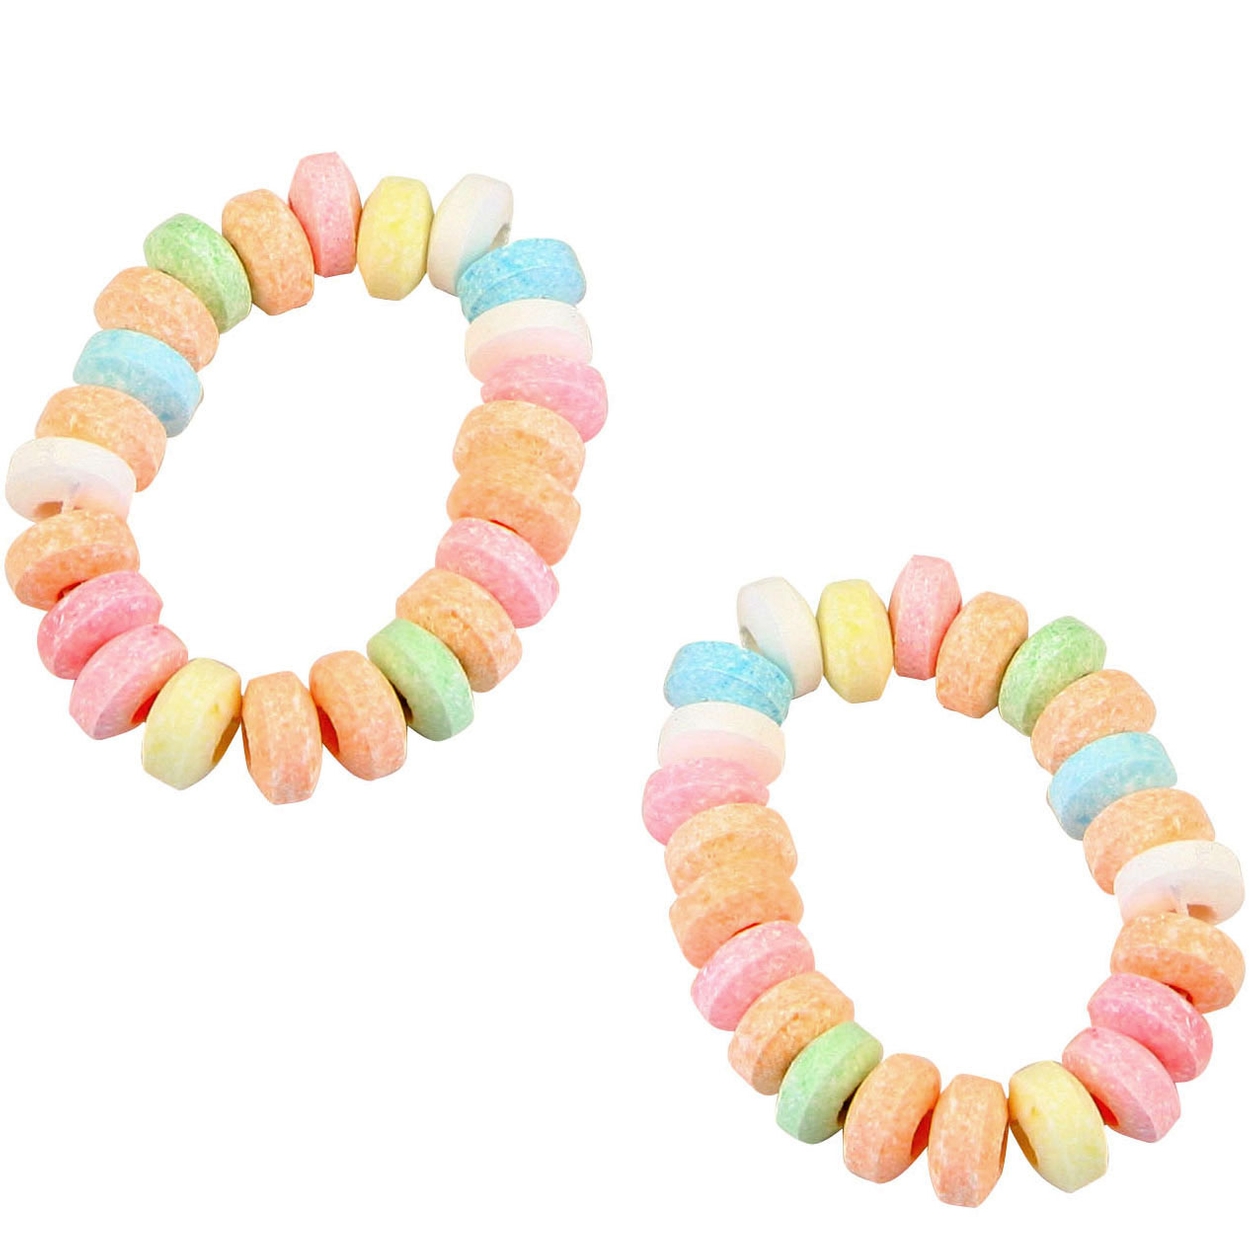 Amazon.com : Candy Necklaces and Bracelets Individually Wrapped, Colorful  Fruit Flavored Stretchable Edible Jewelry, Candies for Basket Stuffers,  Pack of 12 : Grocery & Gourmet Food